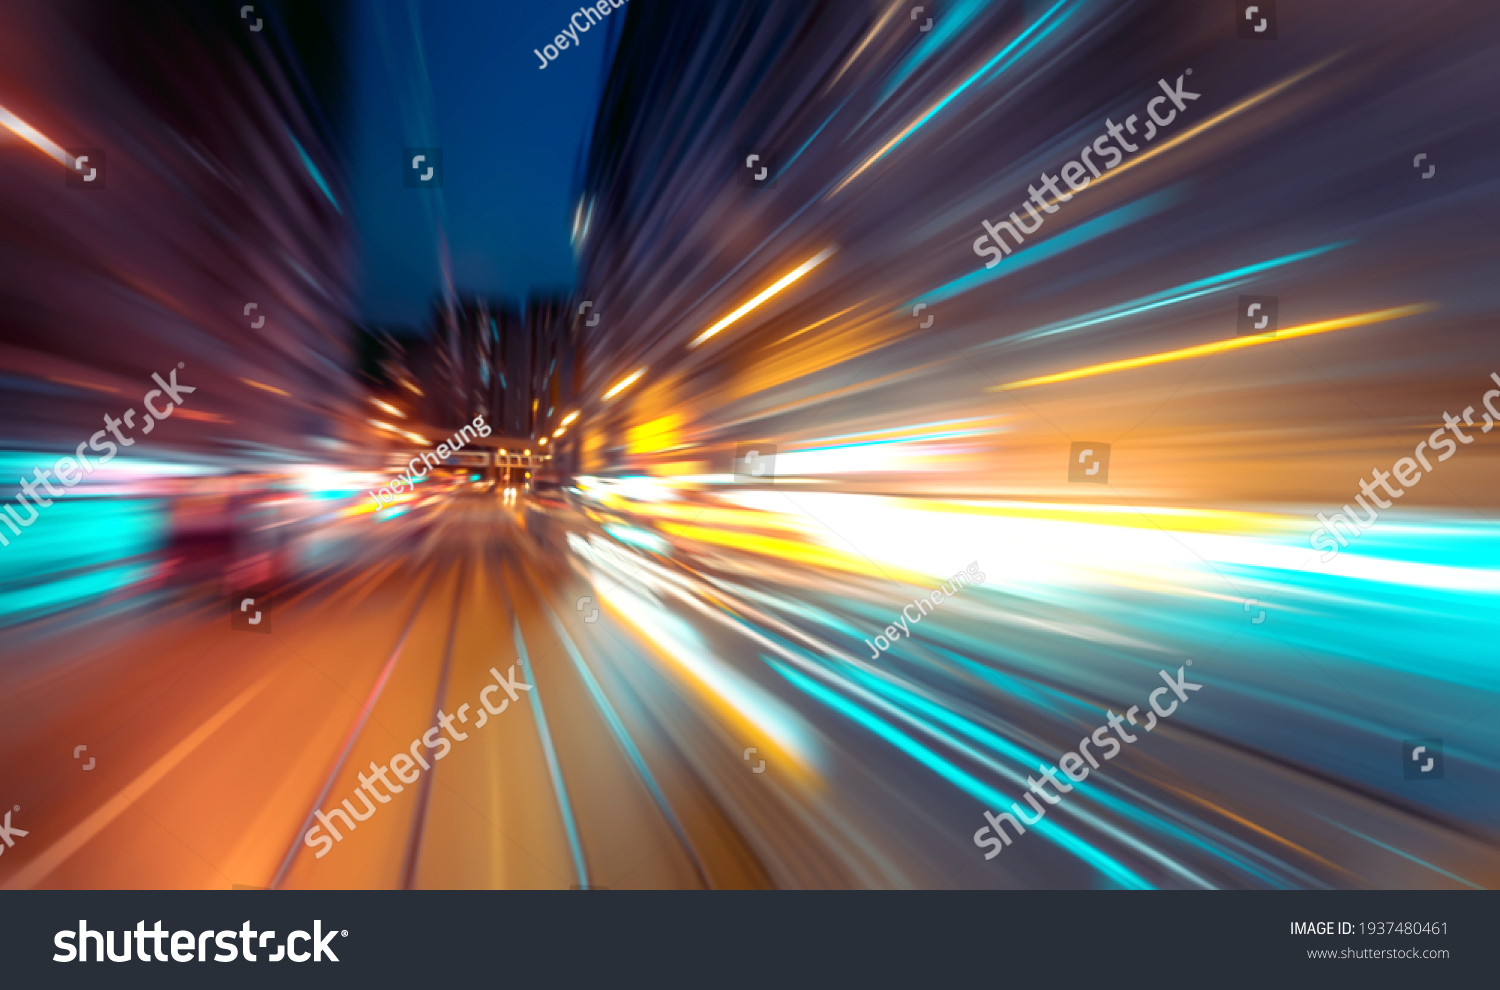 Abstract image of night traffic light trails in the city #1937480461